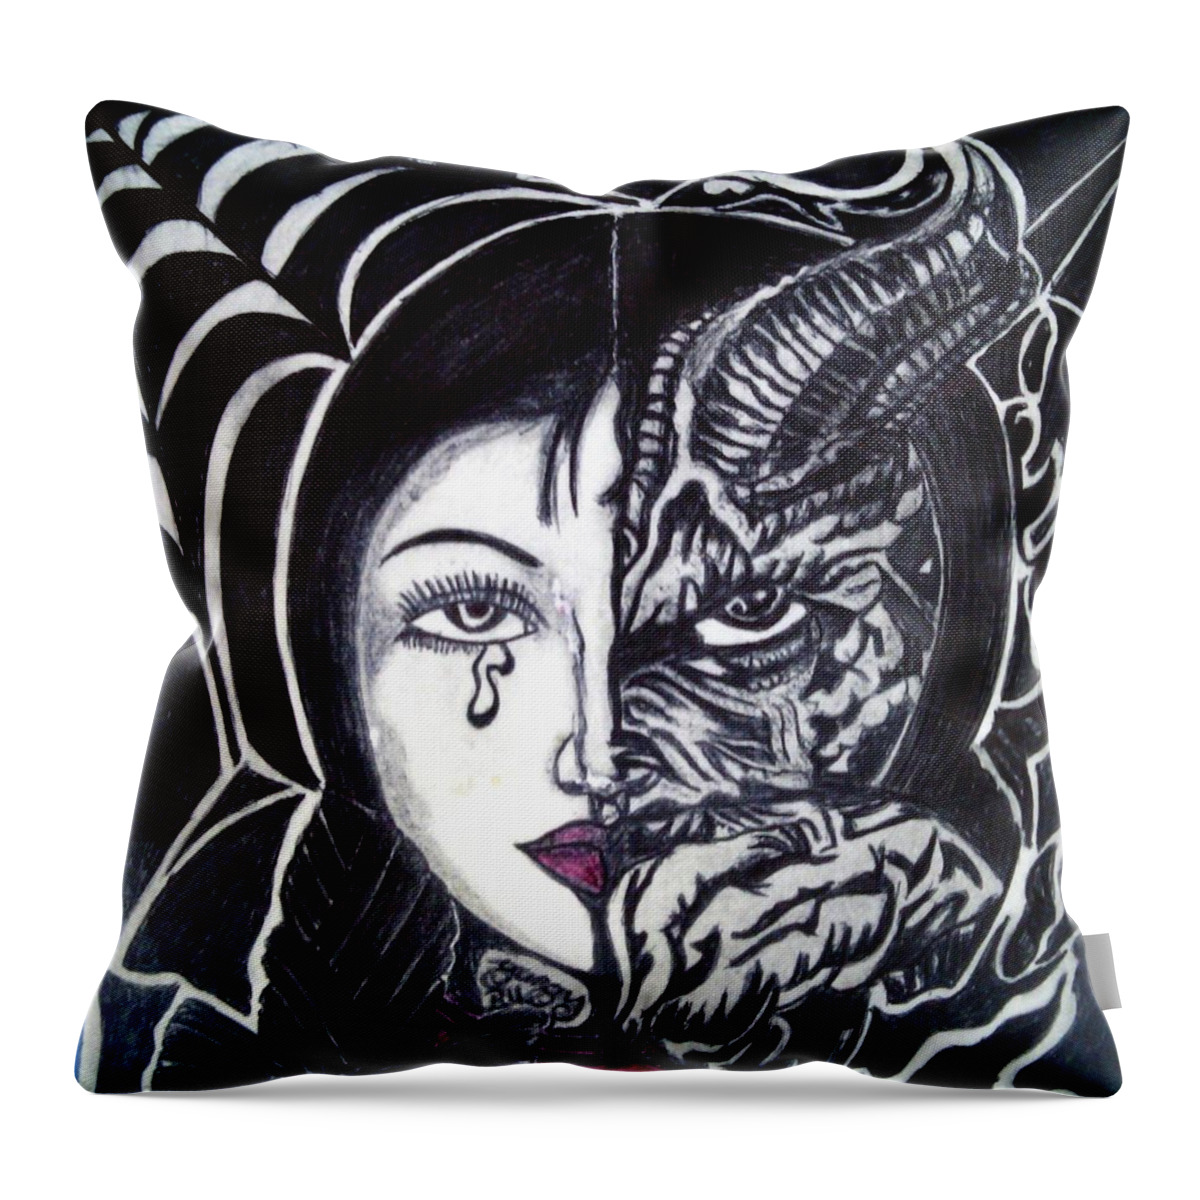 Prison Art Throw Pillow featuring the drawing Untitled 3 by GungyRu 